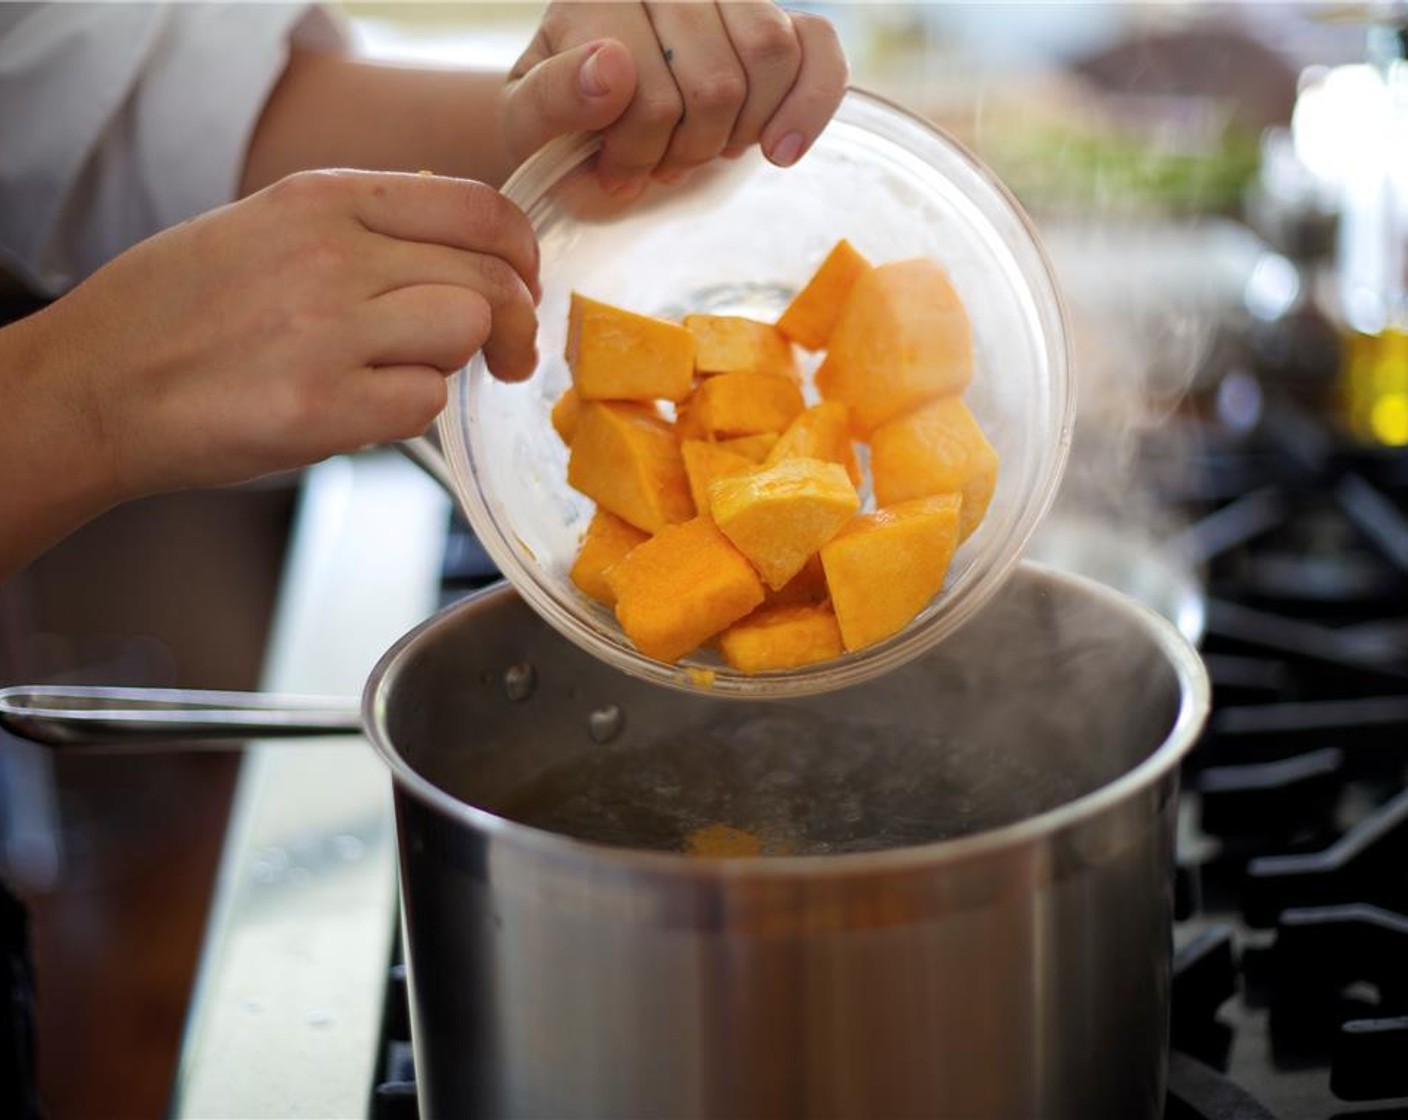 step 1 Place the BButternut Squash (2 1/2 cups) in a medium saucepan and cover with cold water. Bring to a boil and then lower to a simmer. Cook for approximately 10 minutes until fork tender.